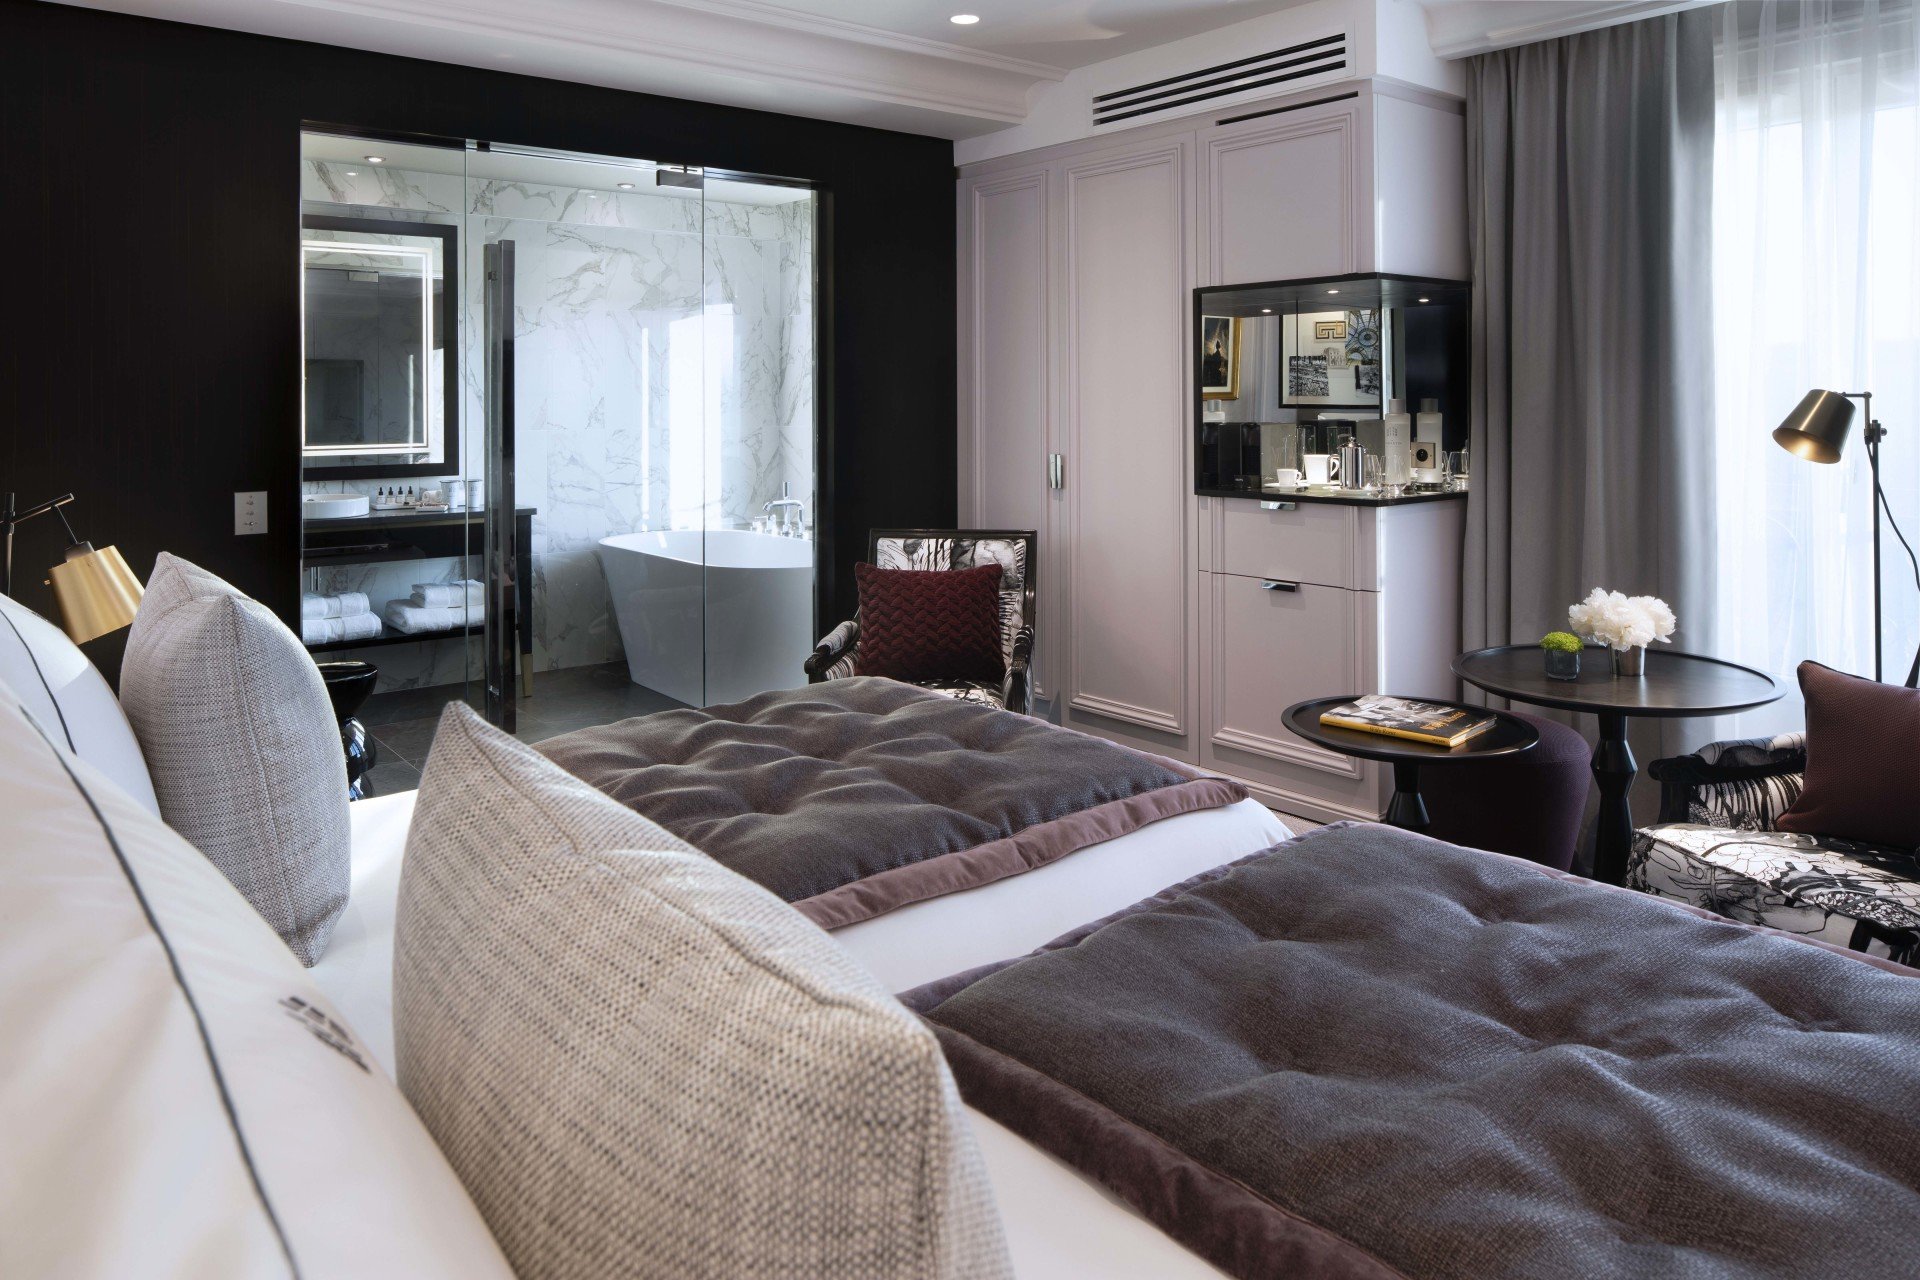 Hotel and Spa Le Damantin Paris - luxury hotel designed by the interior design studio jean-philippe nuel - design room equipped with bed, design armchair, open bathroom - artworks, paintings, dream hotel